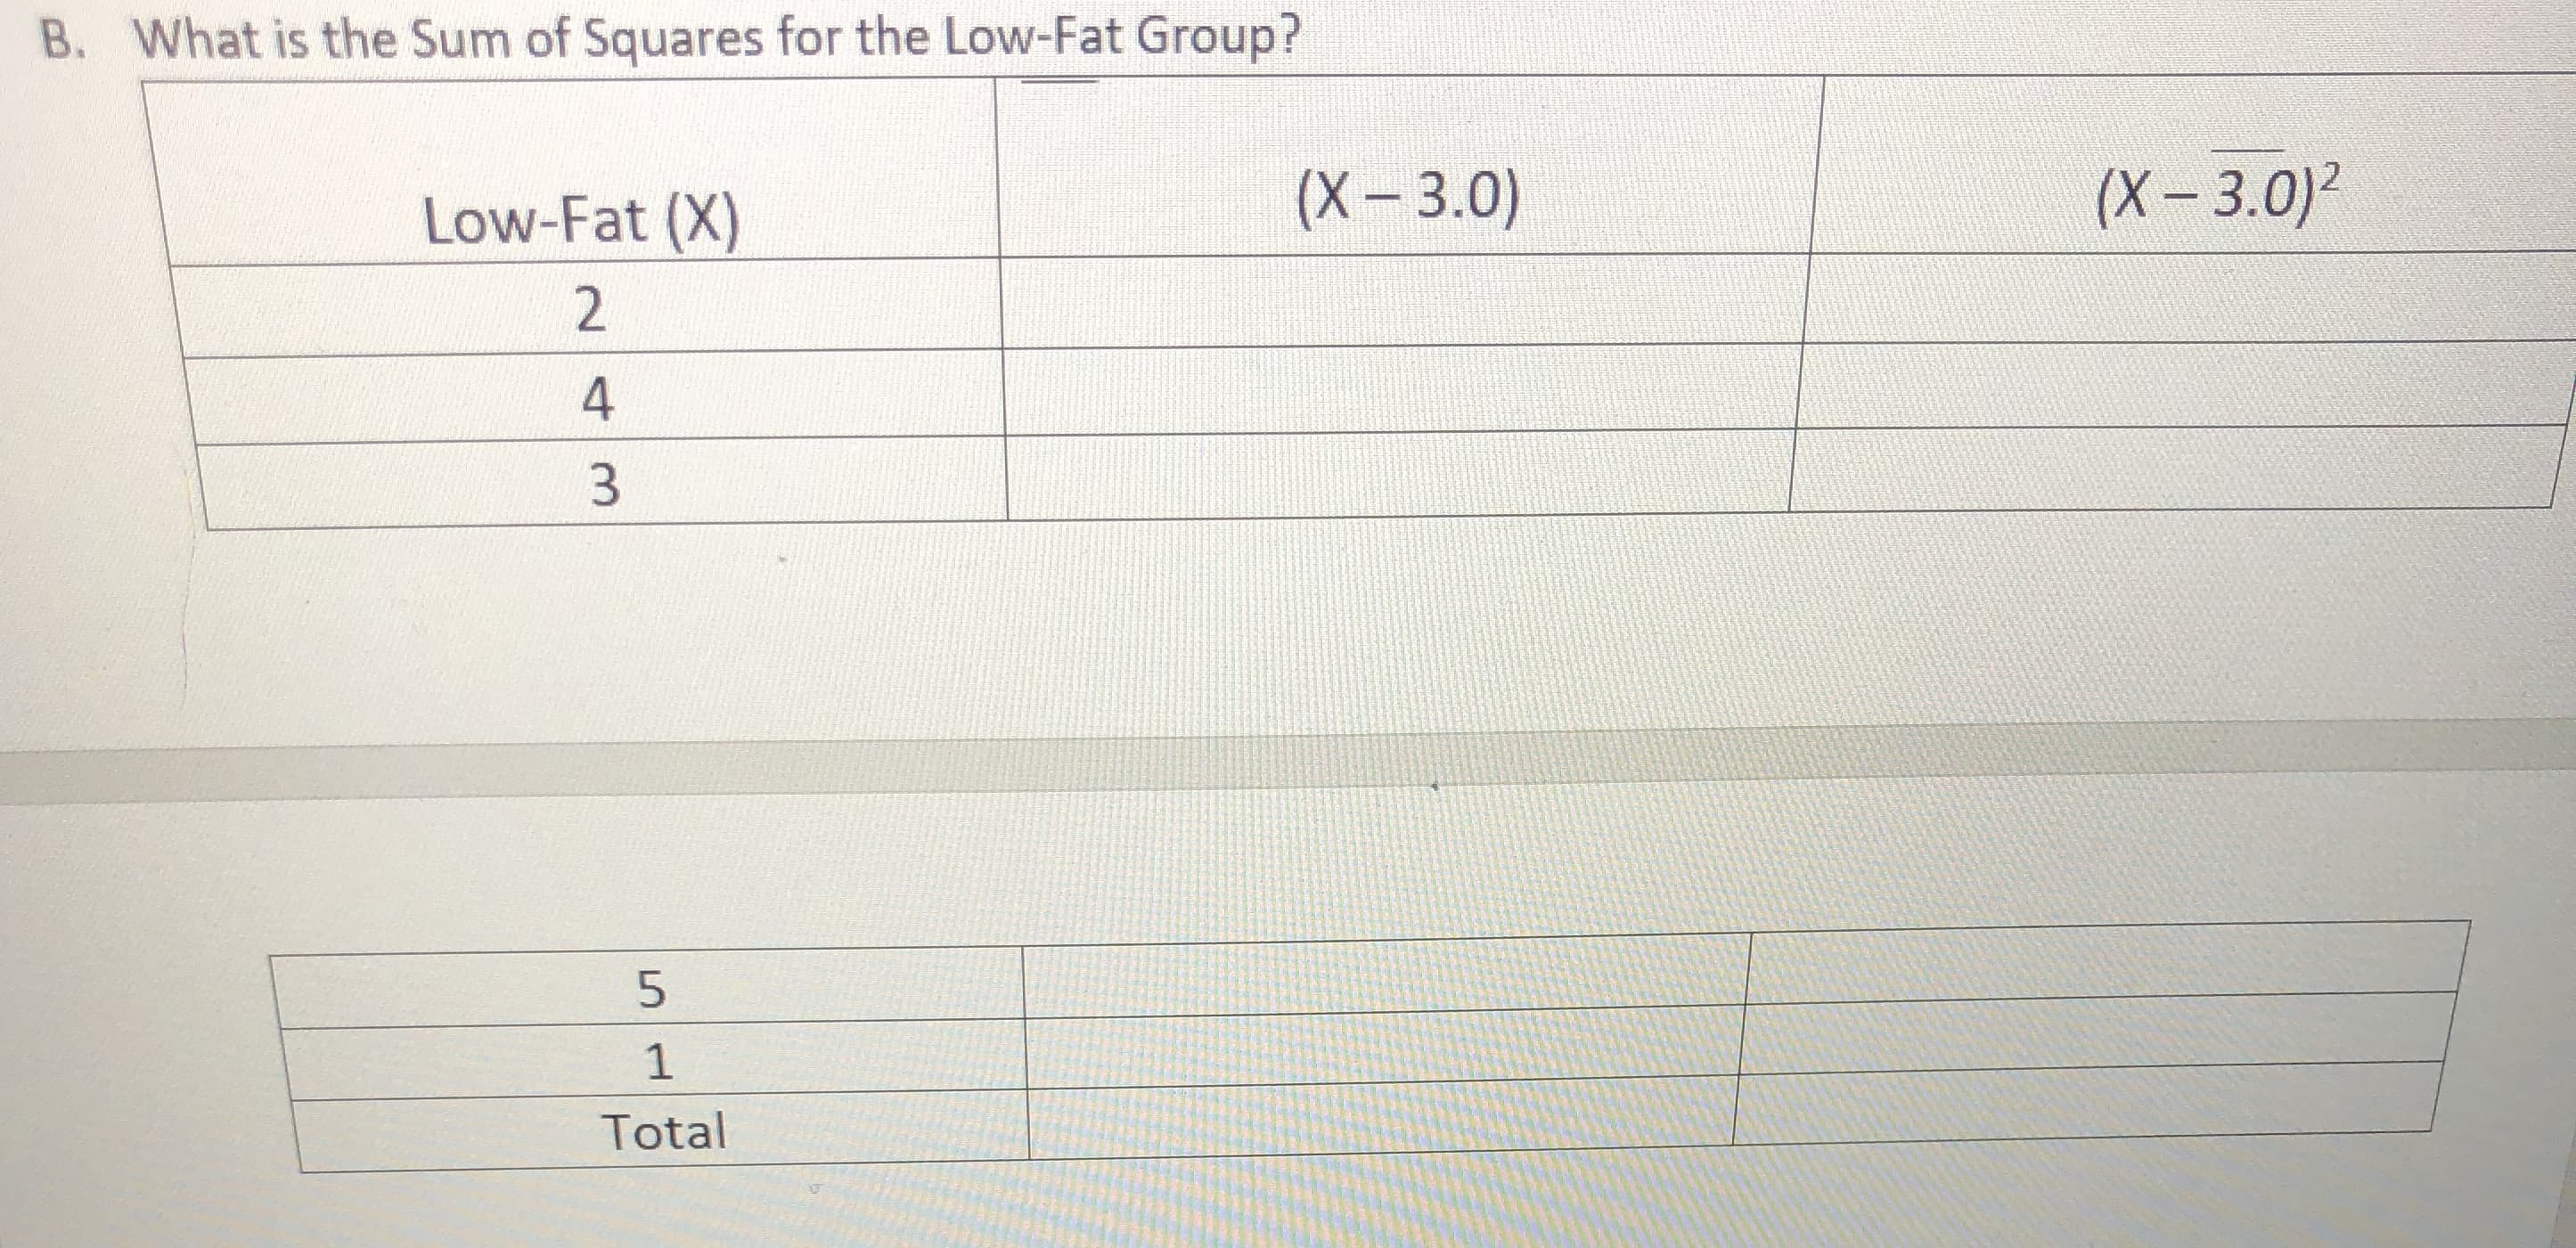 What is the Sum of Squares for the Low-Fat Group?
B.
(X-3.0)2
(X-3.0)
Low-Fat (X)
2
3
5
Total
